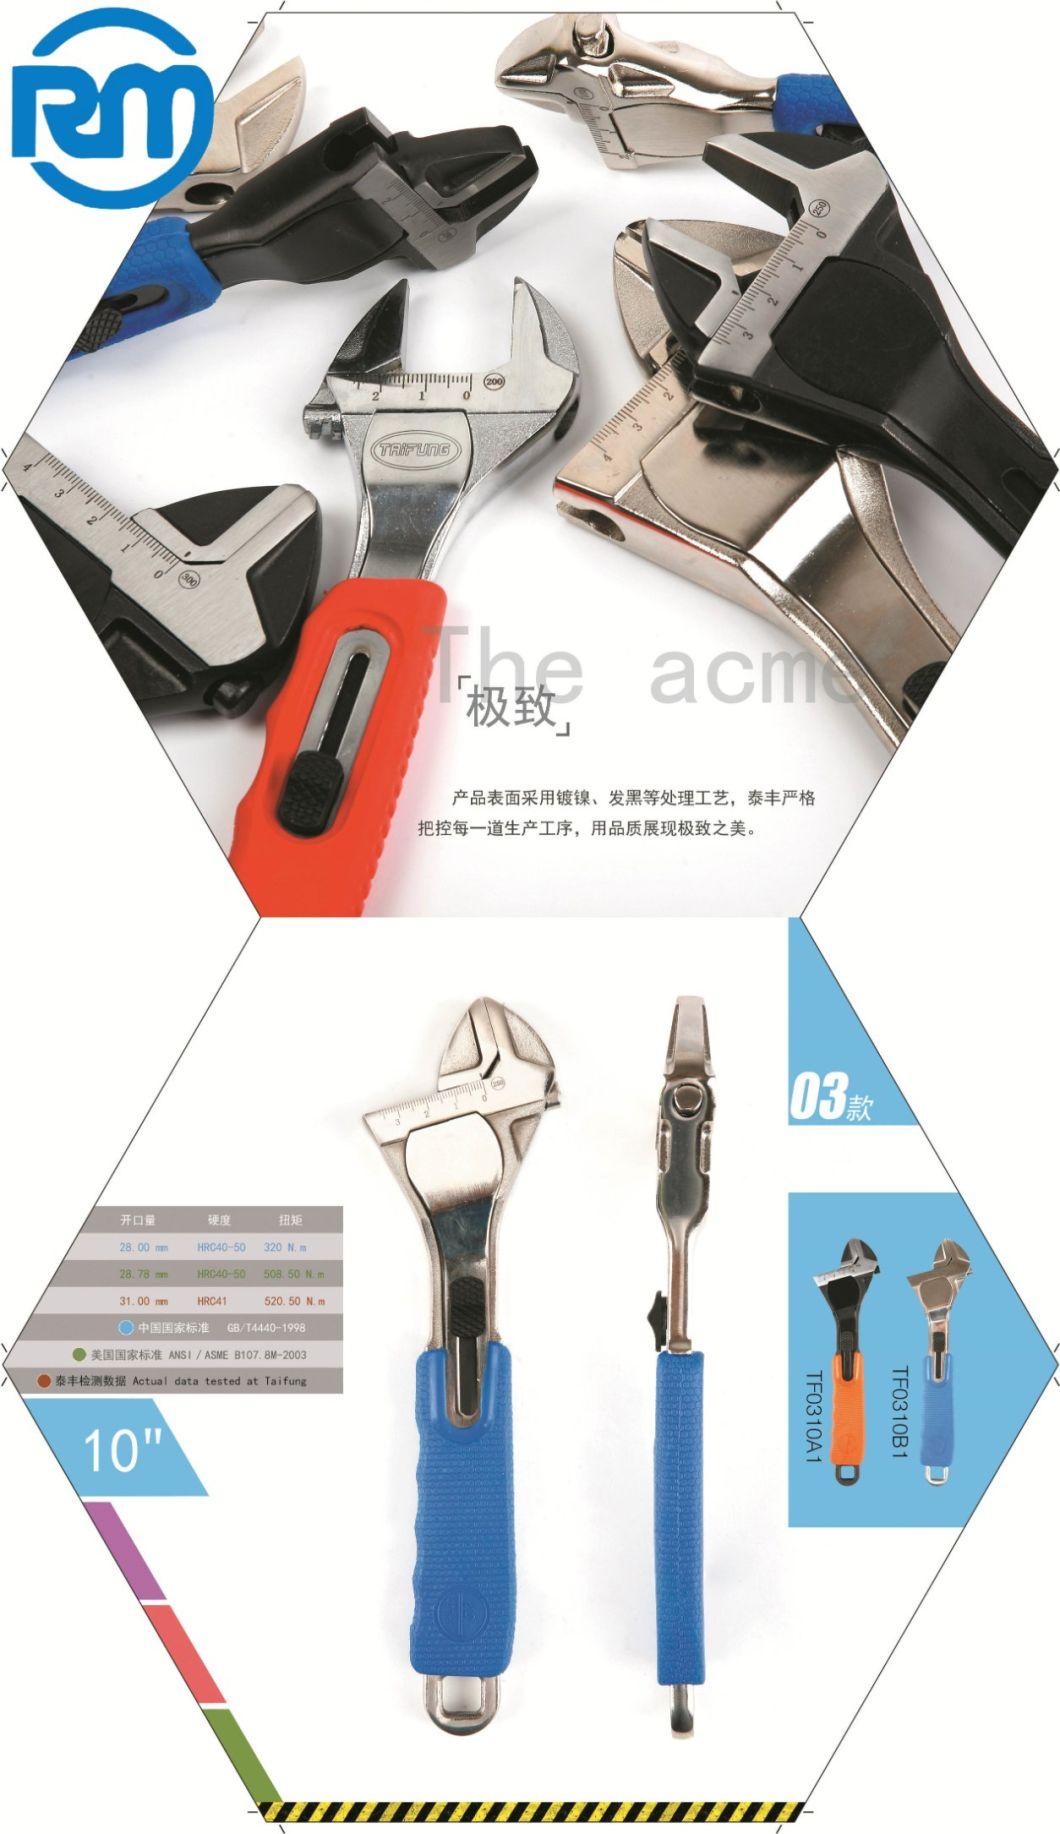 Nickel Plating Surface Wrench Sliding Adjustment System American ASME Standards Professional Quality